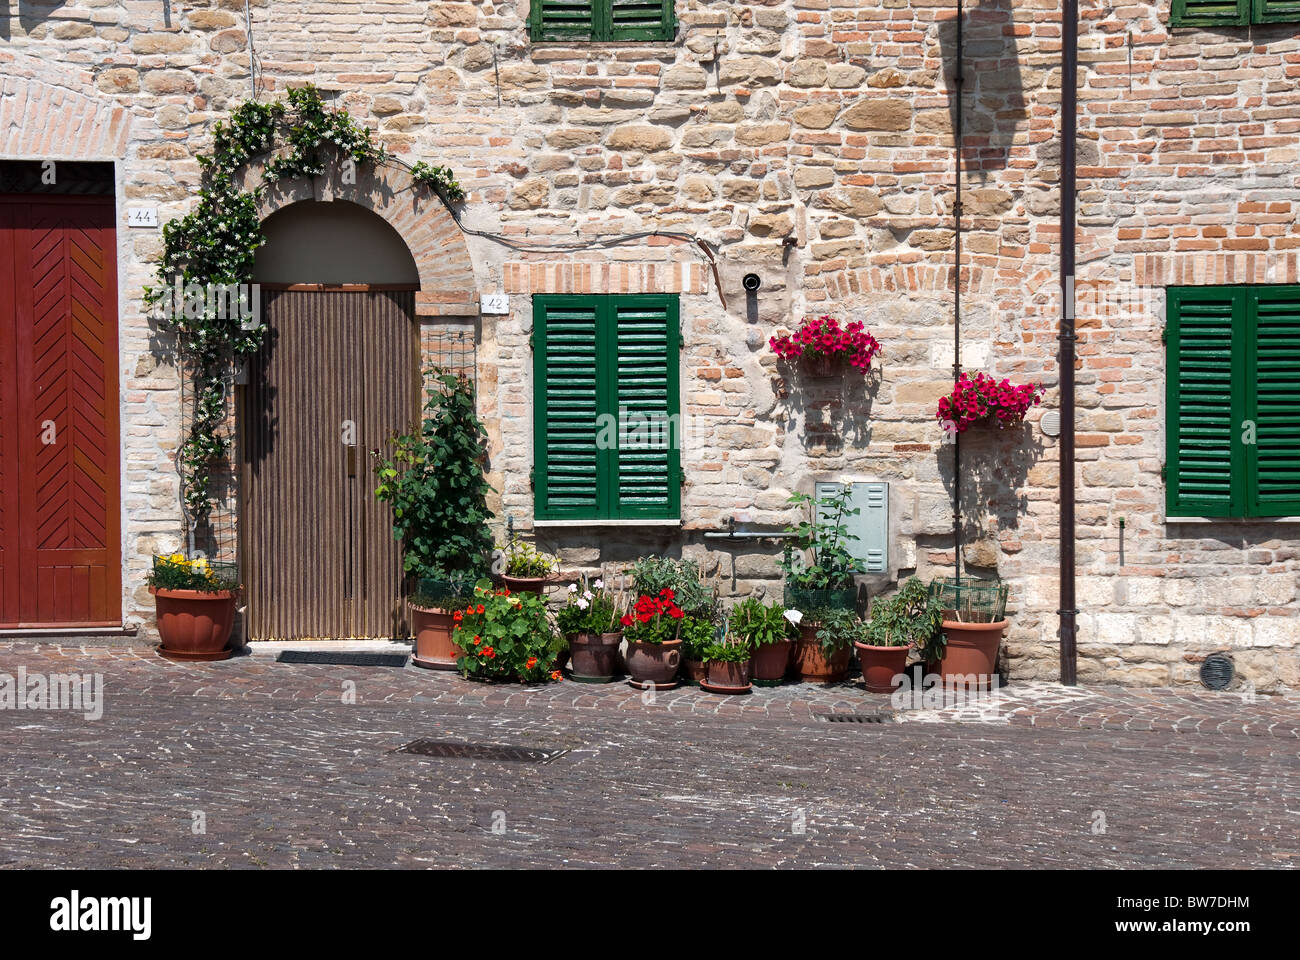 Piazza in the town of Staffolo in the Jesi Hills, Cupramontana area of wine making, le Marche. Stock Photo